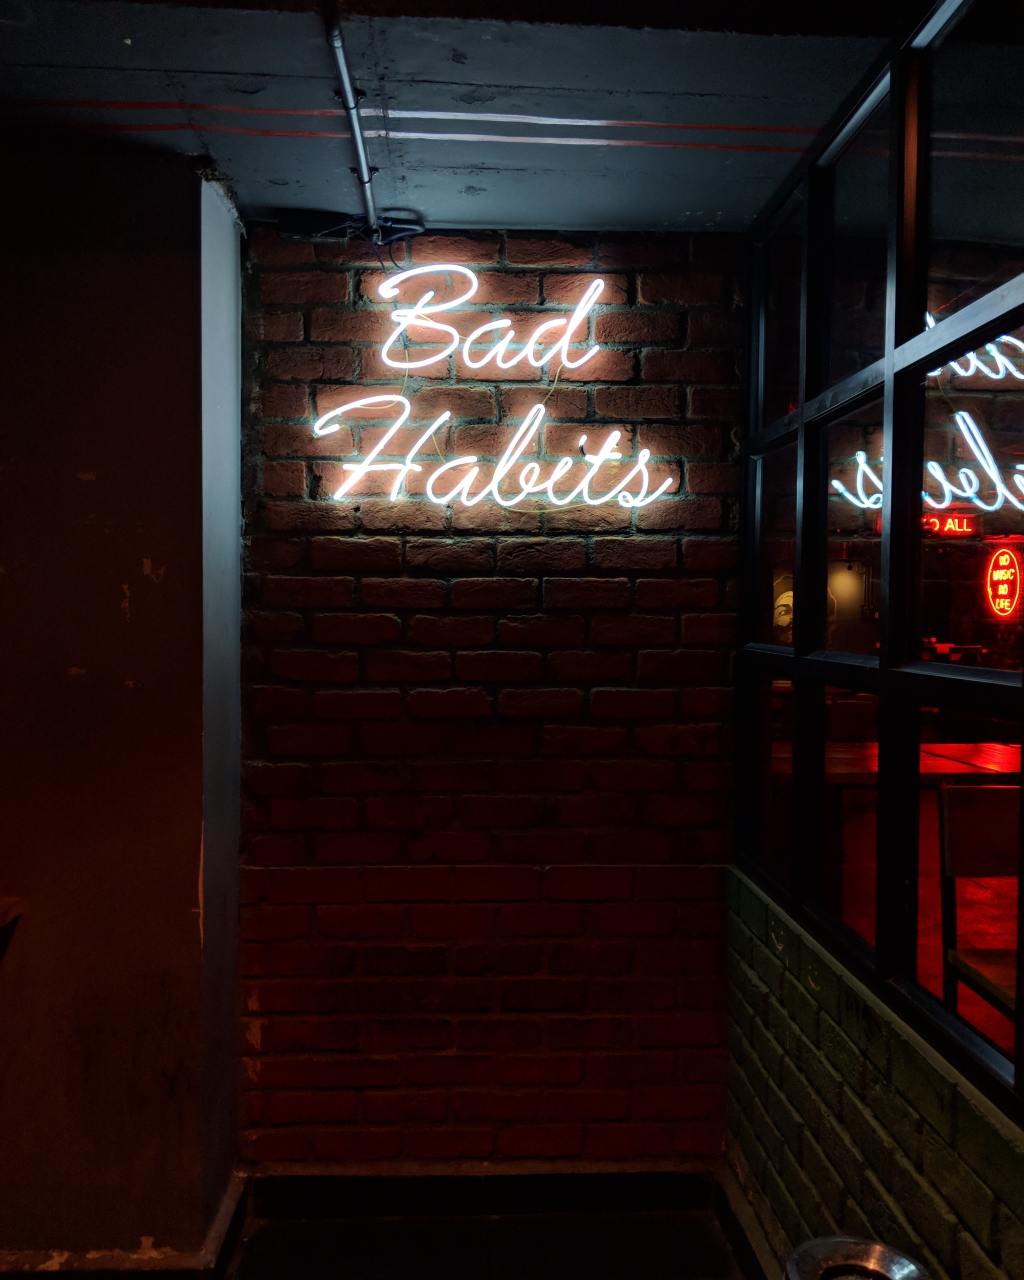 Bad habits: everything you wanted to know about bad habits￼